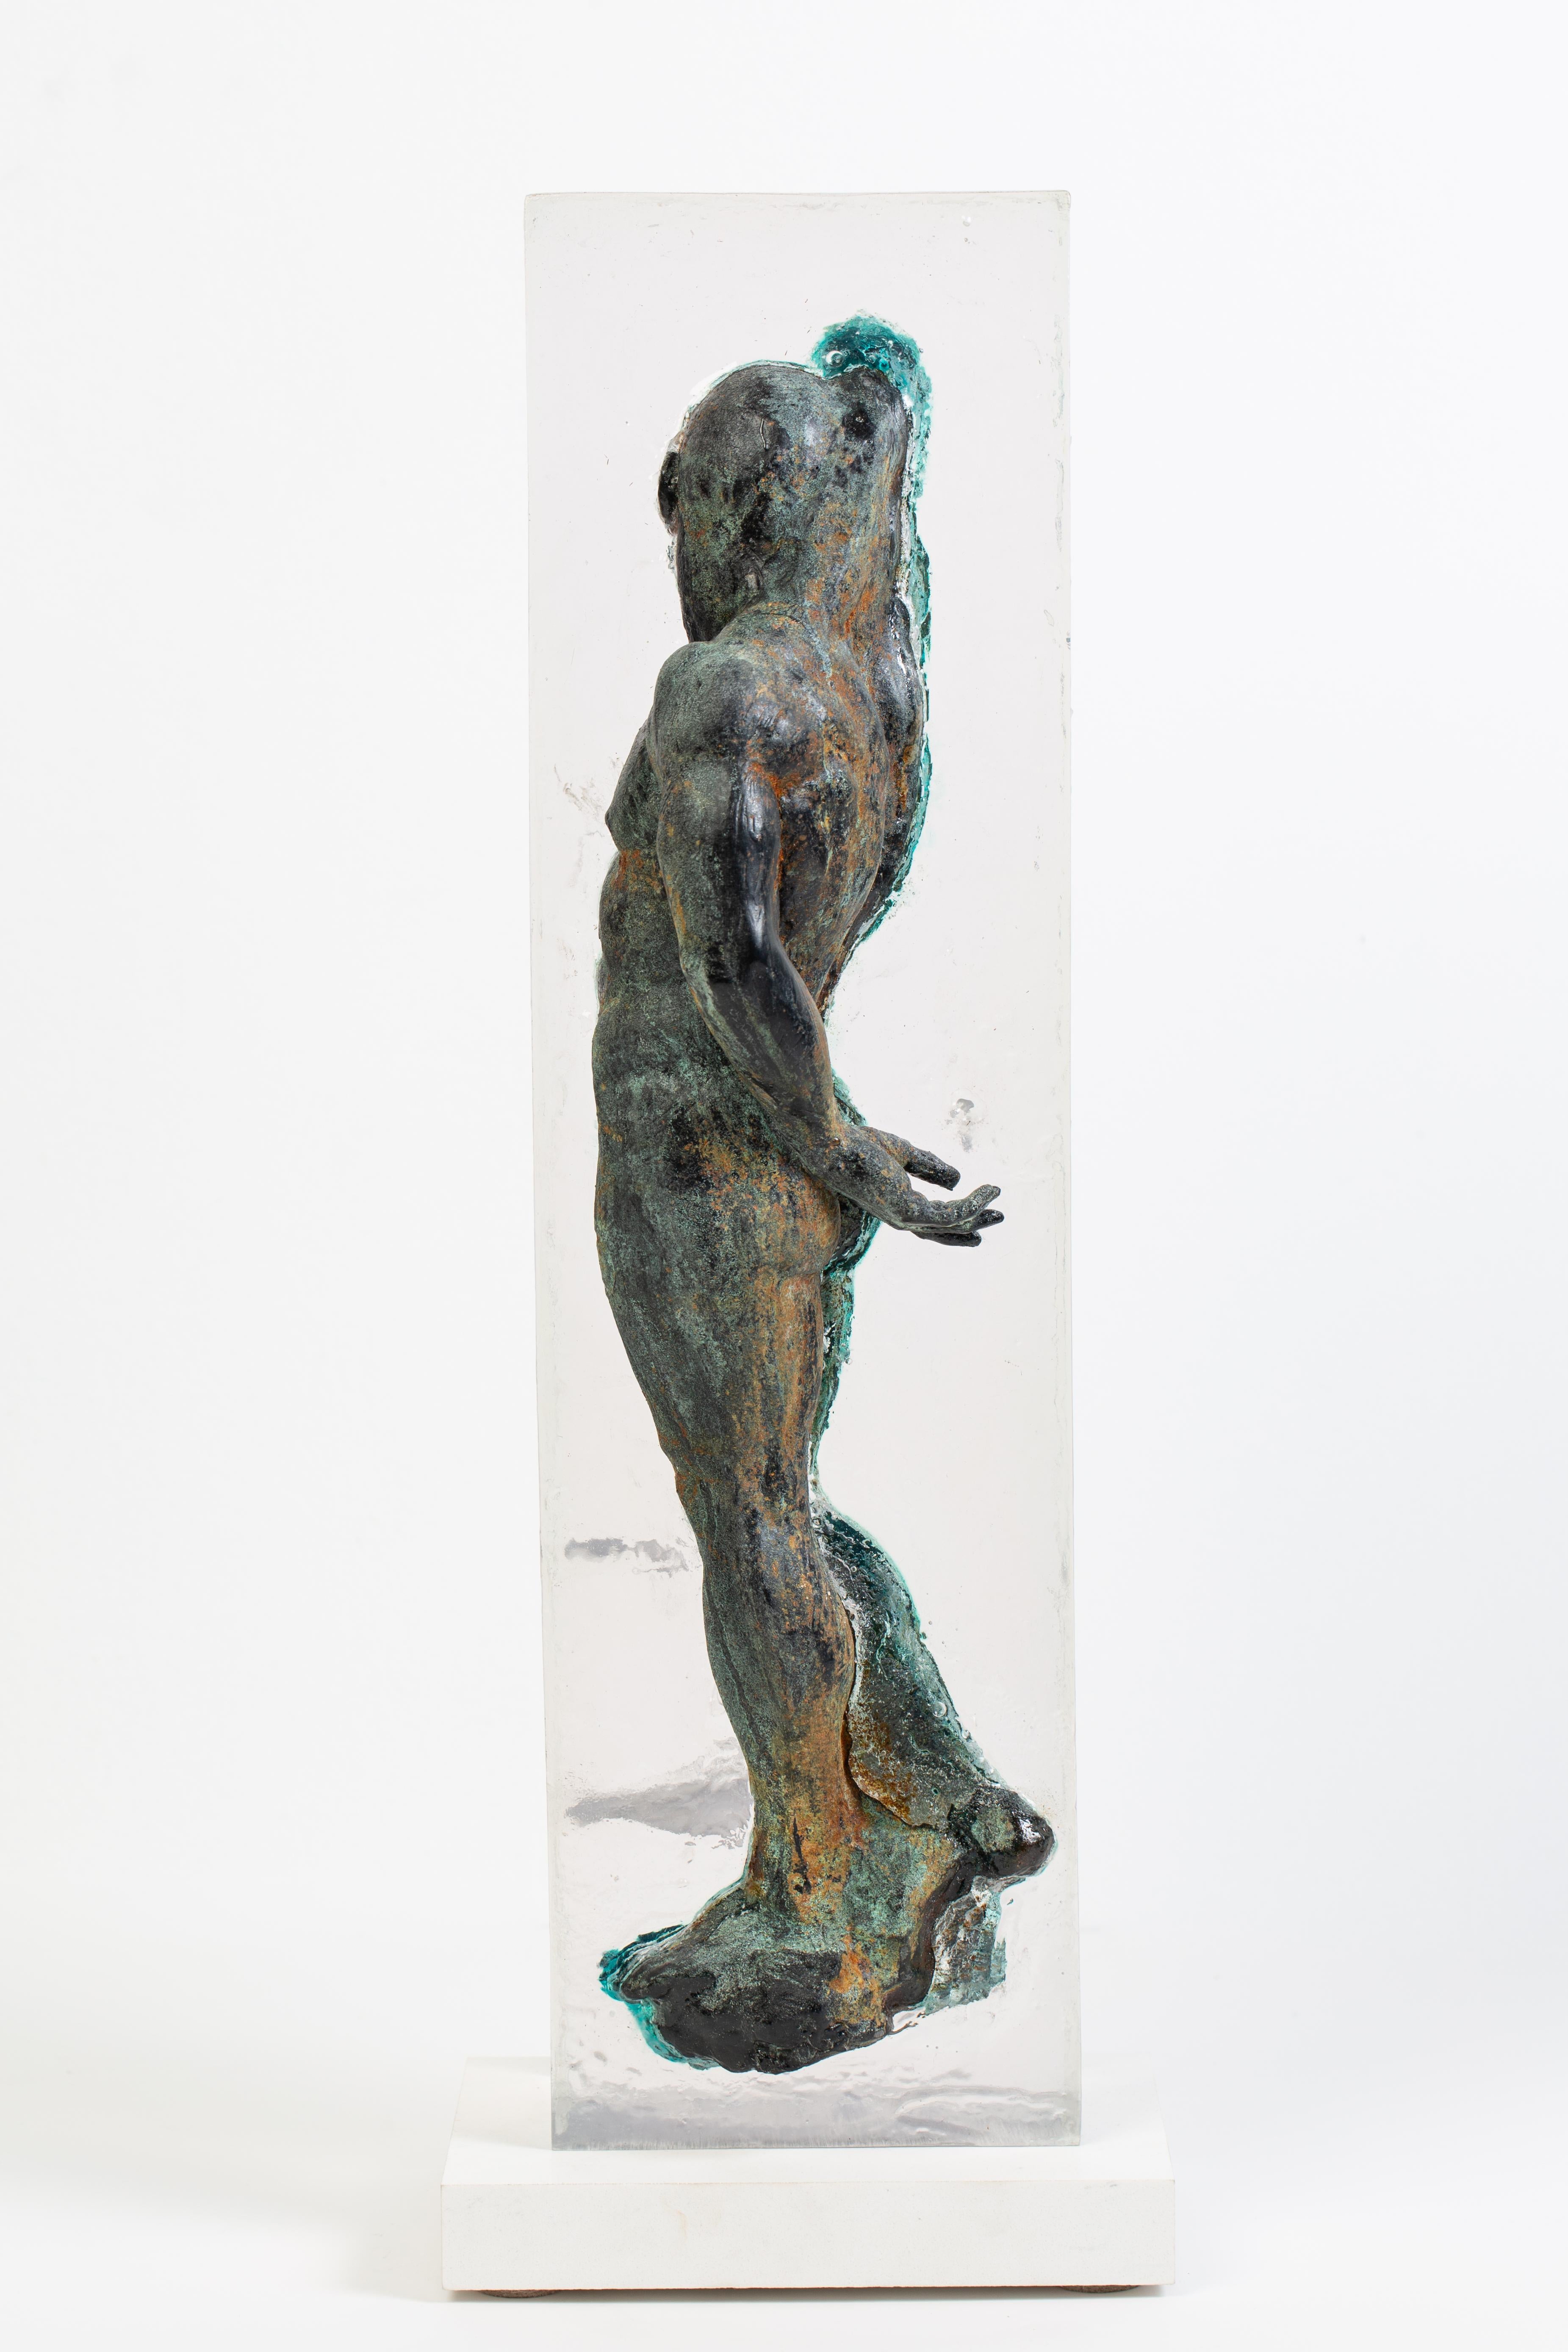 This unique and innovative sculpture of a figure half embedded in a clear resin block showcases the creative ways Dean Kugler chooses to approach sculpting.  The figure is finished in a green hue with flecks of brown rust to reference antique